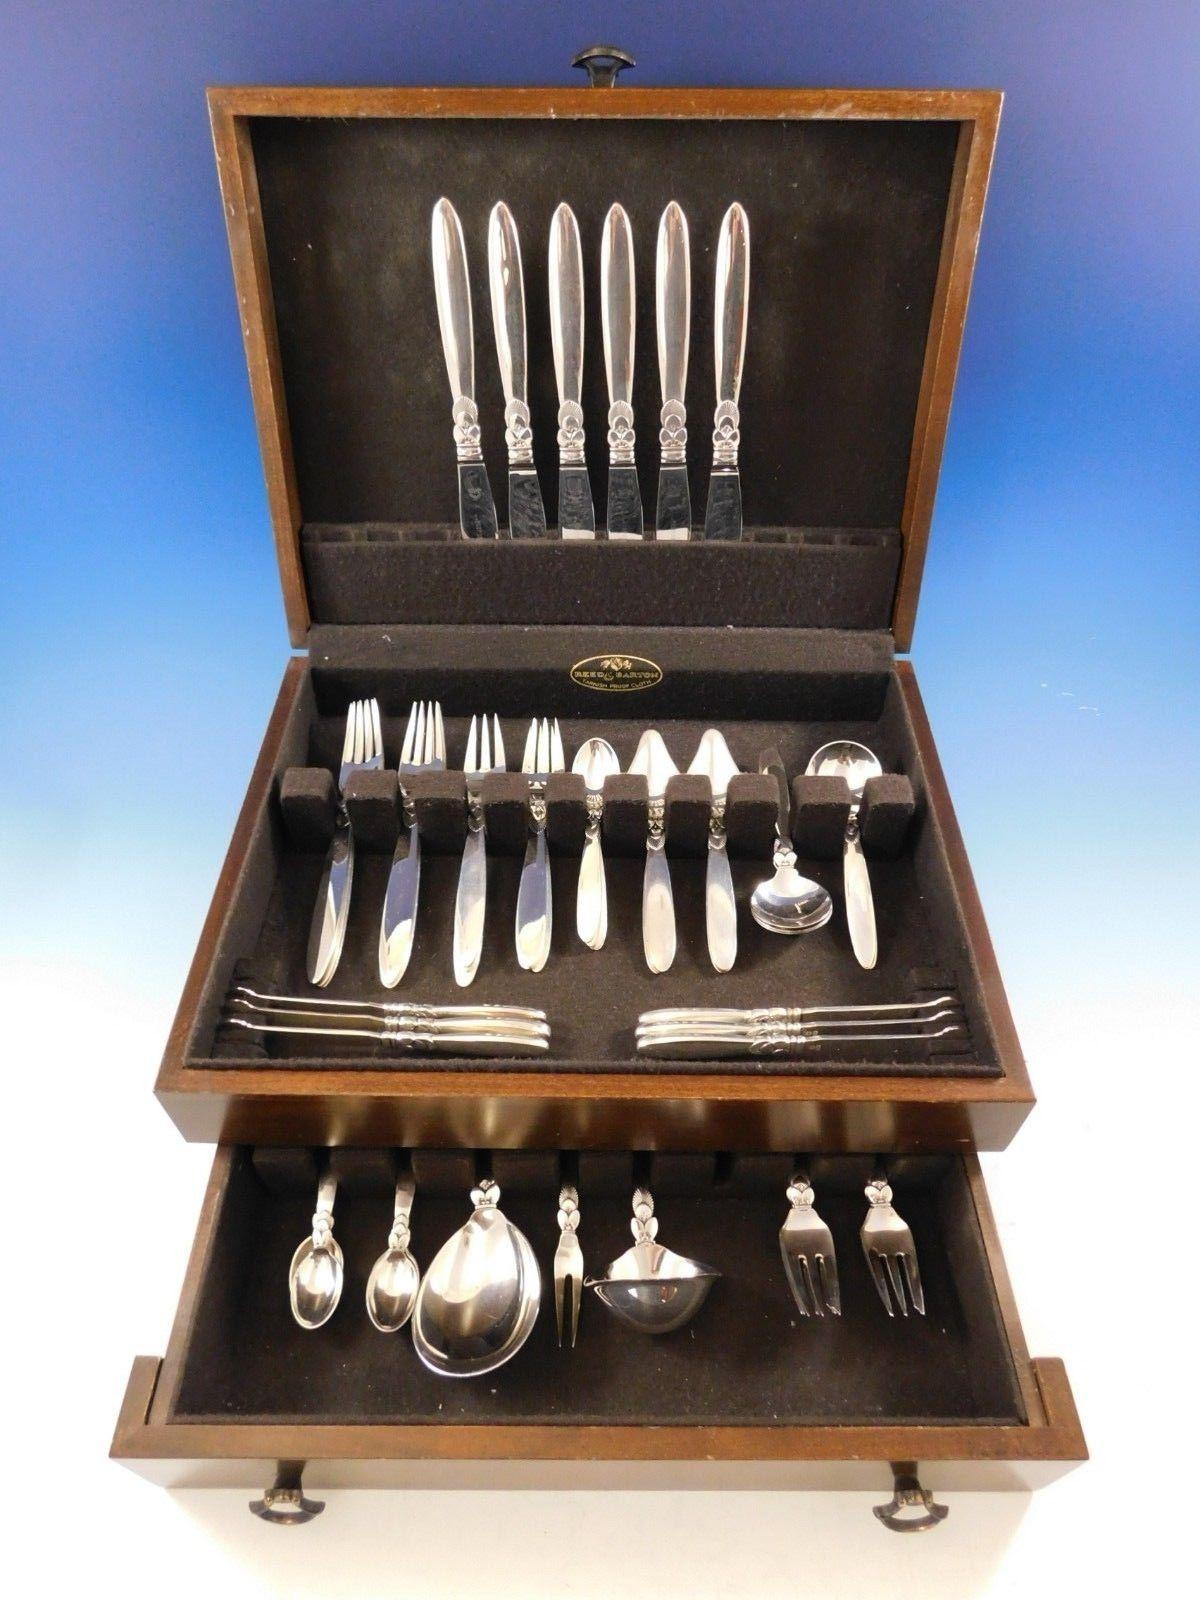 Cactus by Georg Jensen Danish sterling Silver flatware set - 57 pieces. This set includes:

6 dinner knives, long handle, 9 1/4